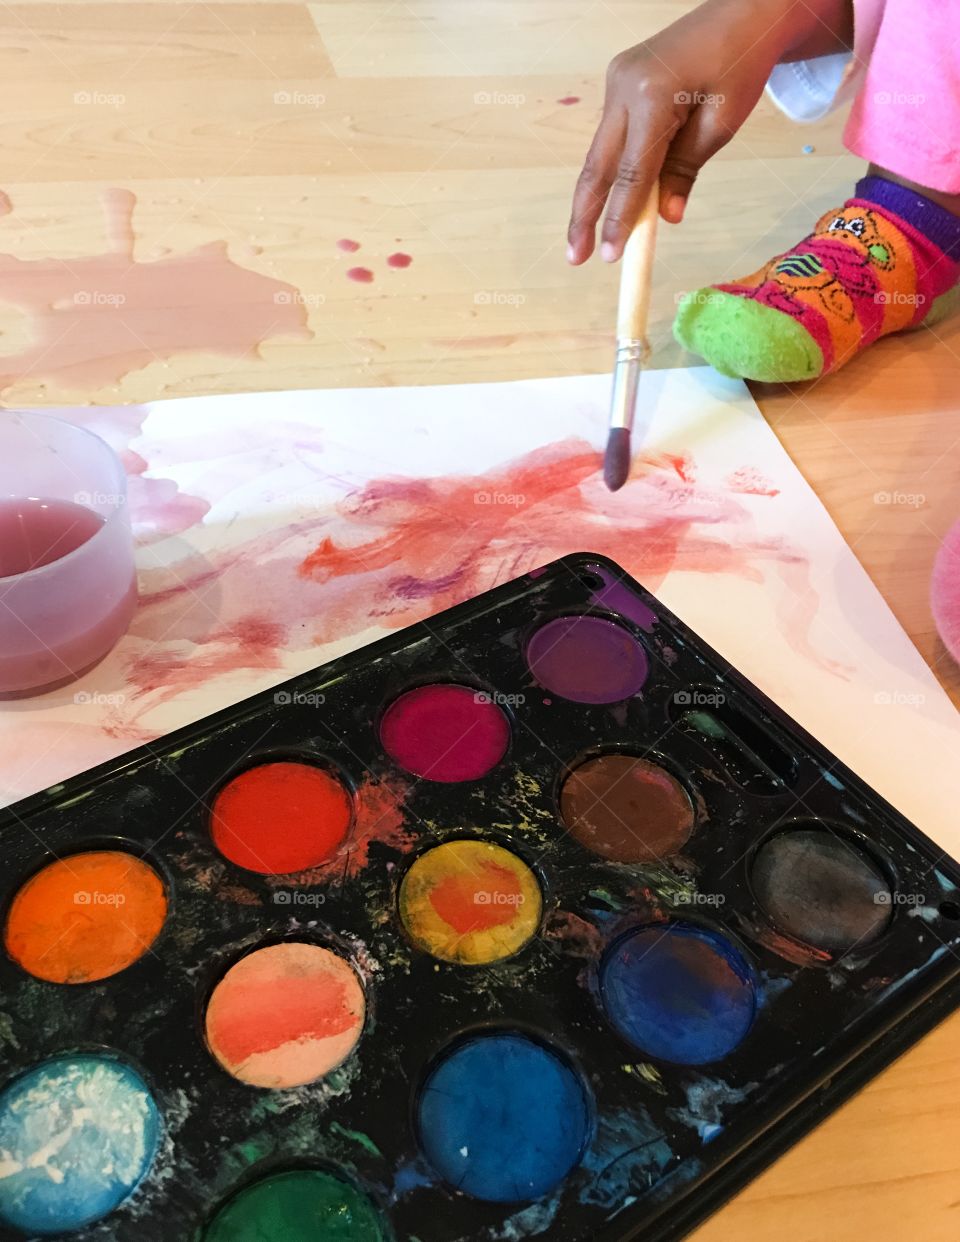 Painting with a toddler can be a messy business!